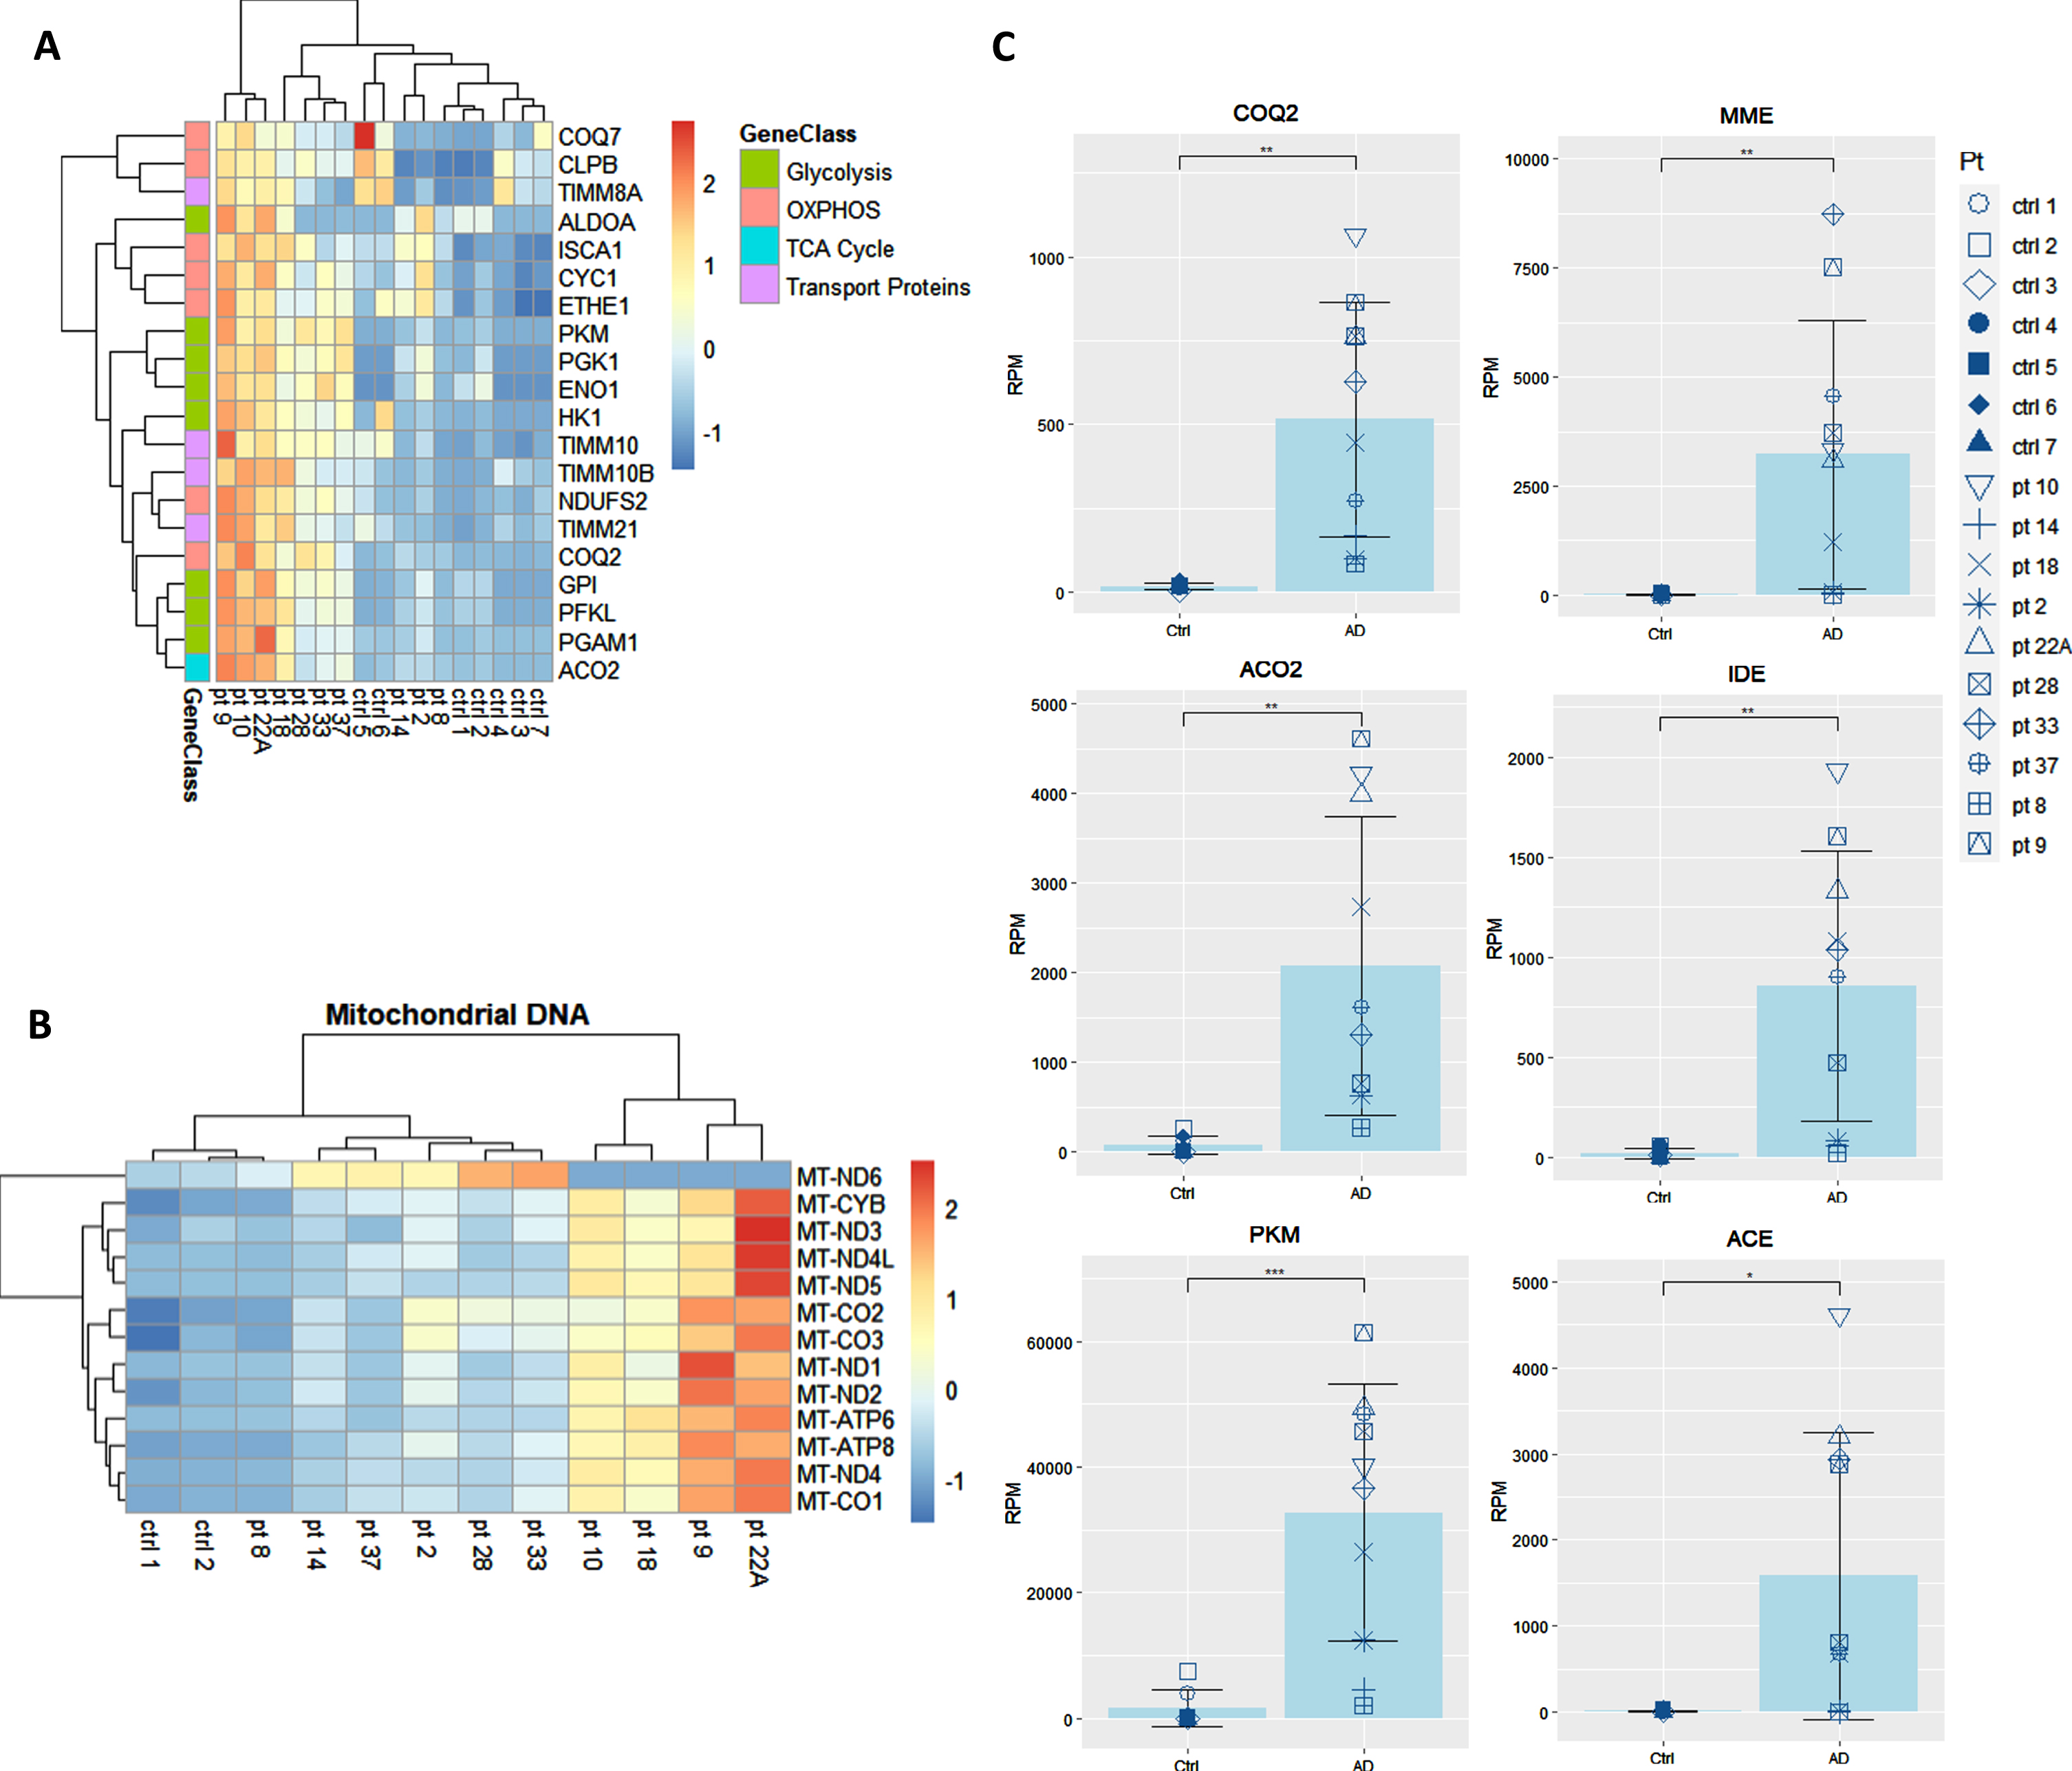 Transcriptome of macrophages of PUFA-supplemented AD patients versus non-supplemented controls (caregivers). A) Microarray heatmaps of transcripts in glycolysis, OXPHOS, TCA, and transport; B) mitochondrial DNA-encoded genes in omega-3 supplemented patients versus non-supplemented caregivers. Color scale indicates the normalized level of expression of the gene for each patient and control. C) Individual analysis of the expression of energy and degradation gene transcripts in Reads per Million (RPM) in healthy non-supplemented caregivers versus PUFA-supplemented AD patients (p < 0.01).